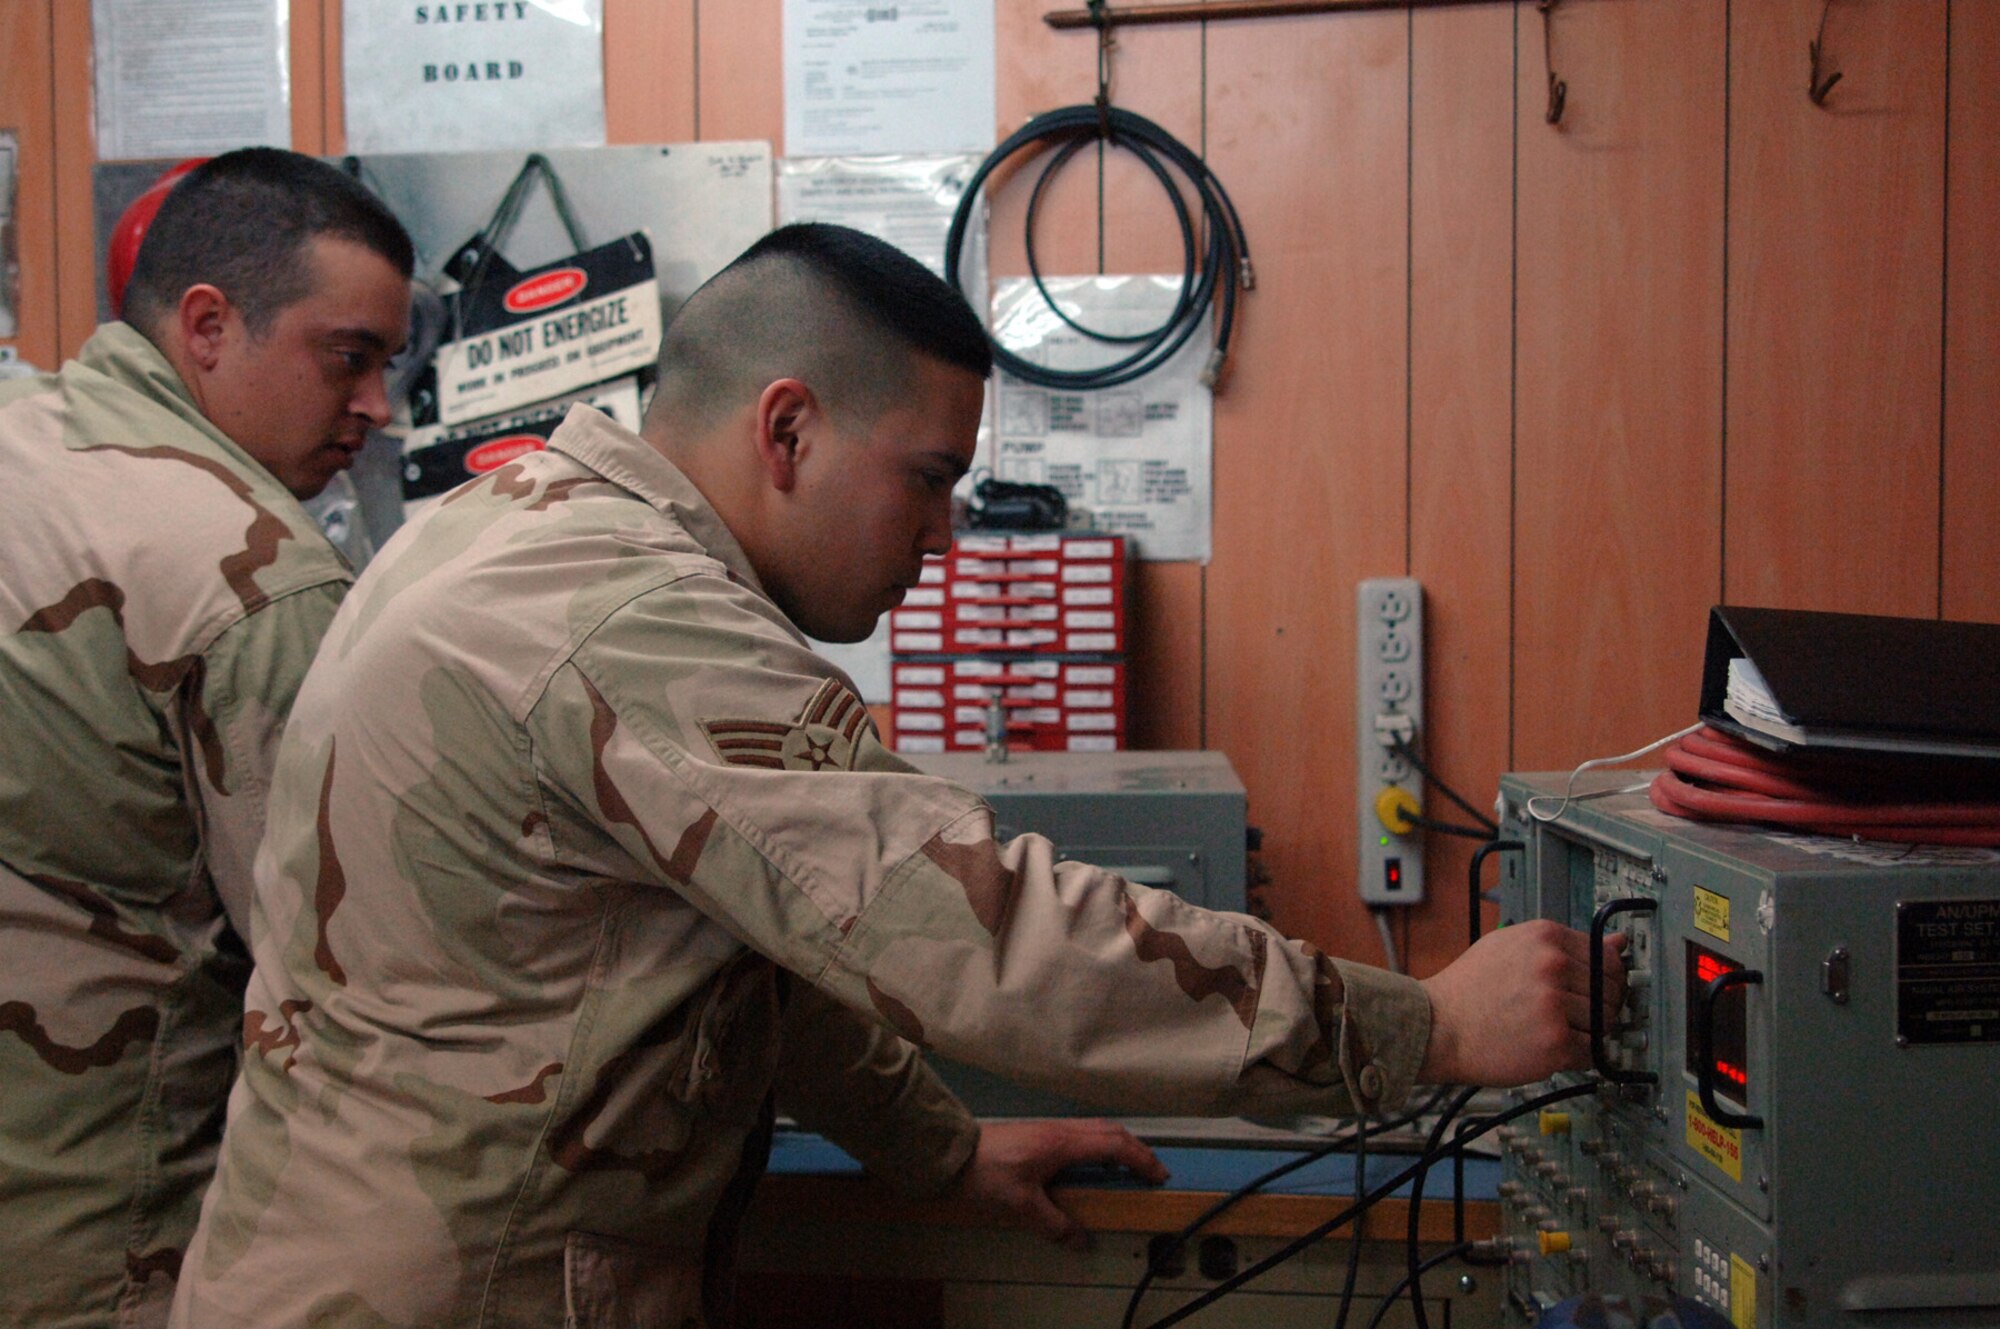 Balad Air Base, Iraq - Senior Airmen Jason Gleason and Charles Storr, both radar technicians, bench check a UPX-27 Interrogator, a key component of the Identify Friend or Foe (IFF) system, which challenges and identifies aircraft. Both Airmen are assigned to the 727th Expeditionary Air Control Squadron (EACS).  Airman Gleason is deployed from the 728th Air Control Squadron (ACS) at Eglin Air Force Base, Fla. Airman Storr is a volunteer augmentee from the 603rd ACS, Aviano Air Base, Italy. Also known as Kingpin, the self-sustaining 727th EACS is comprised of nealry 200 Airmen from 27 different Air Force specialties. Kingpin is responsible for maintaining positive control over aircraft operating in Iraq's 277,000 miles of airspace. (U.S. Air Force photo/Major Damien Pickart)        